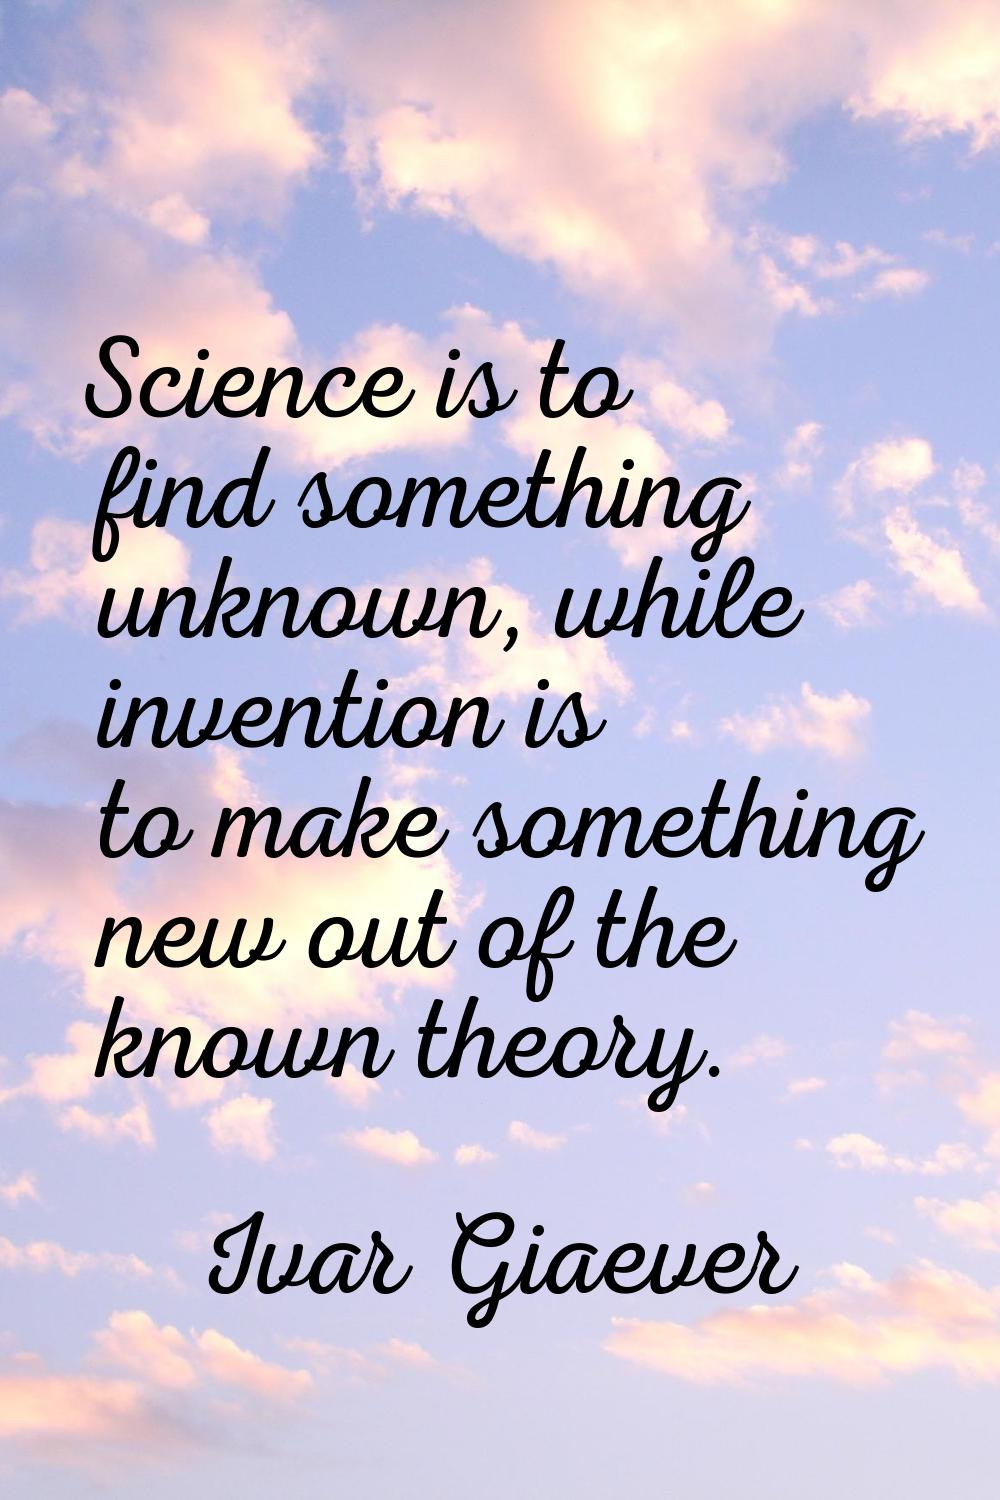 Science is to find something unknown, while invention is to make something new out of the known the